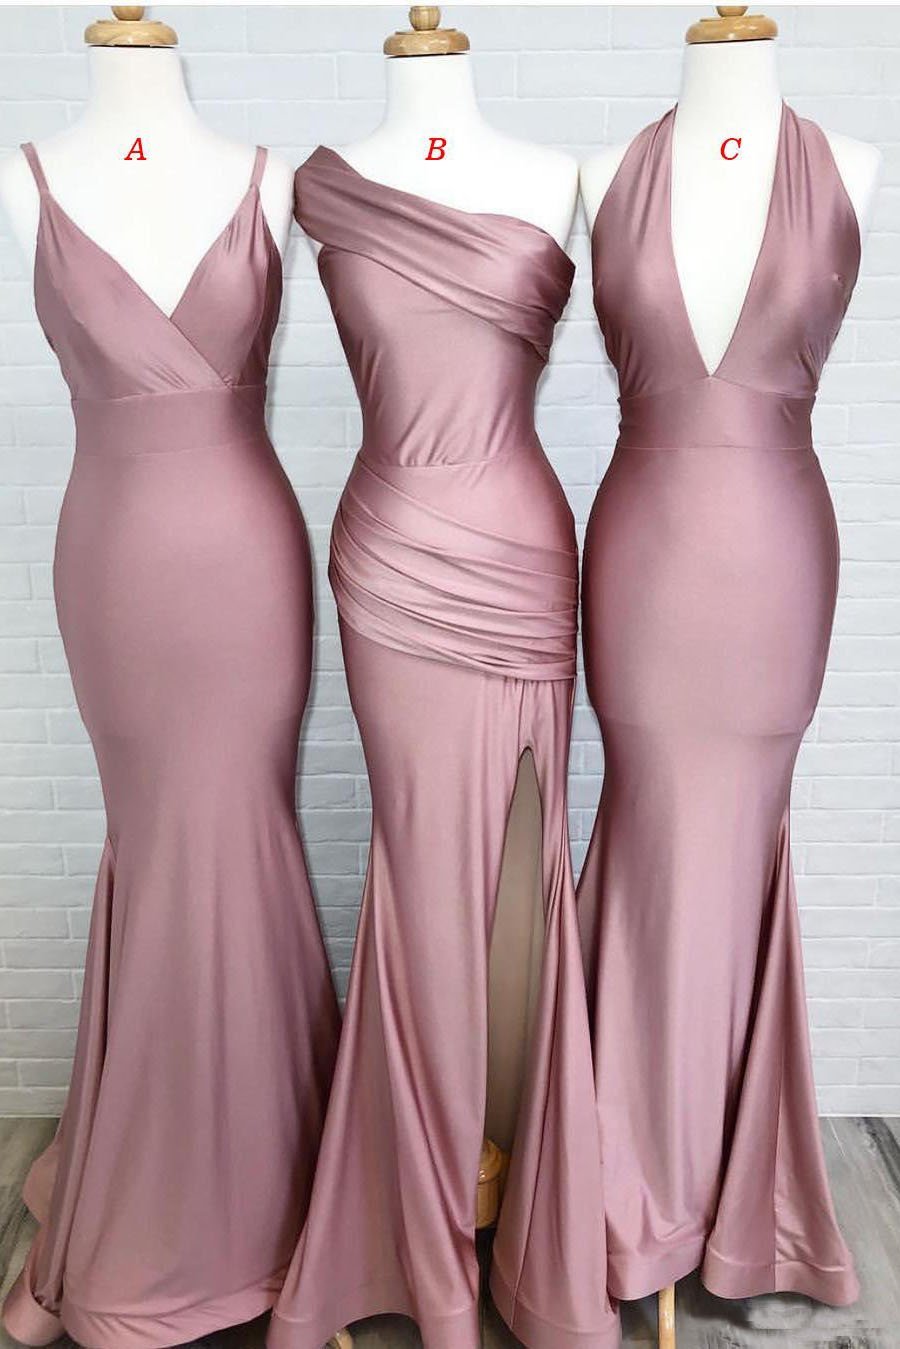 Dusty Rose Mermaid V Neck Split Side Long Evening Gowns Bridesmaid Dresses RS987